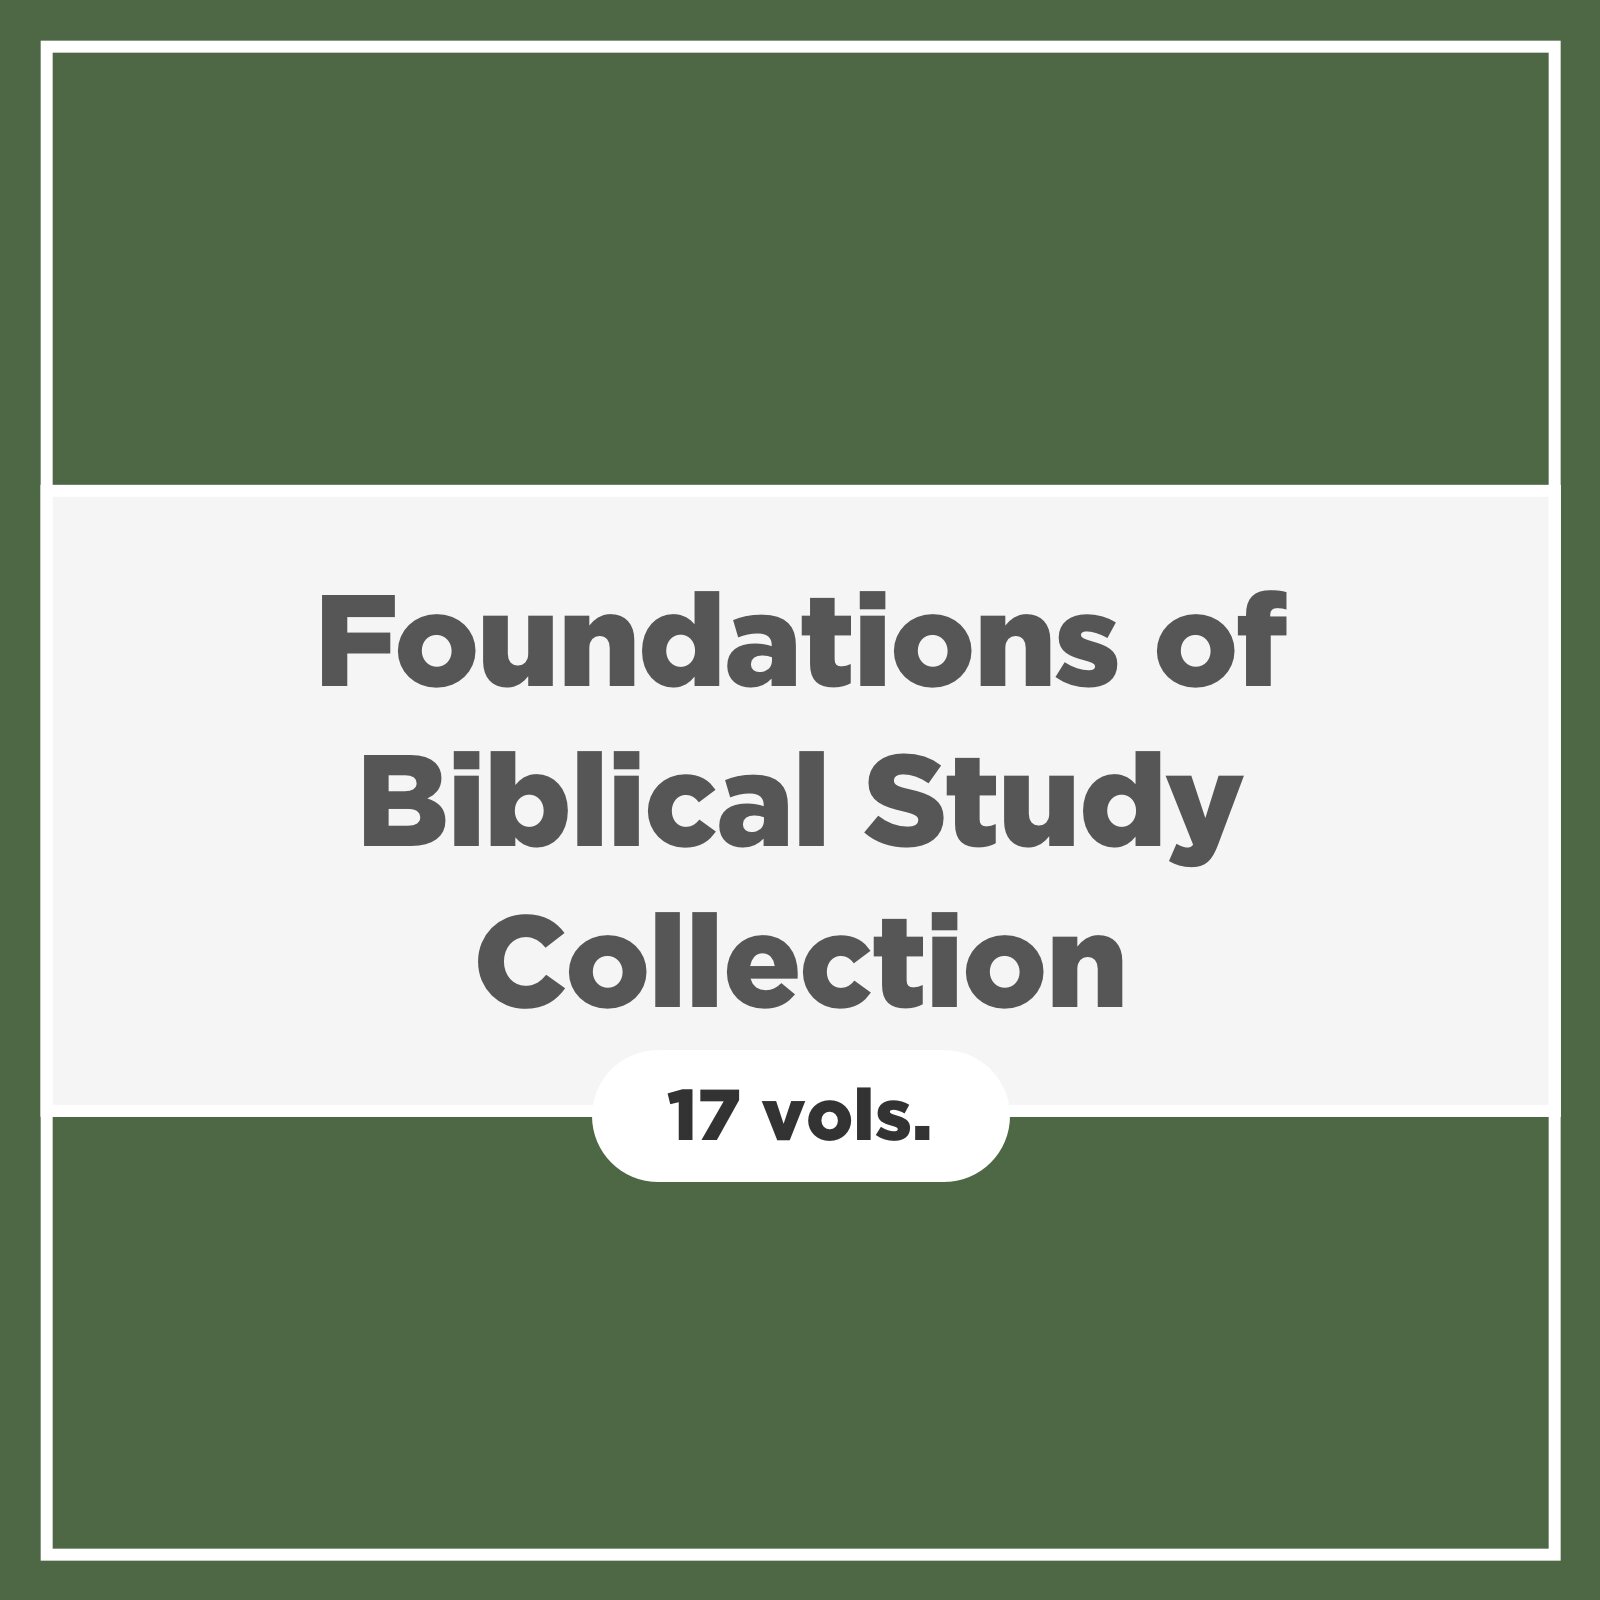 Foundations of Biblical Study Collection (17 vols.)